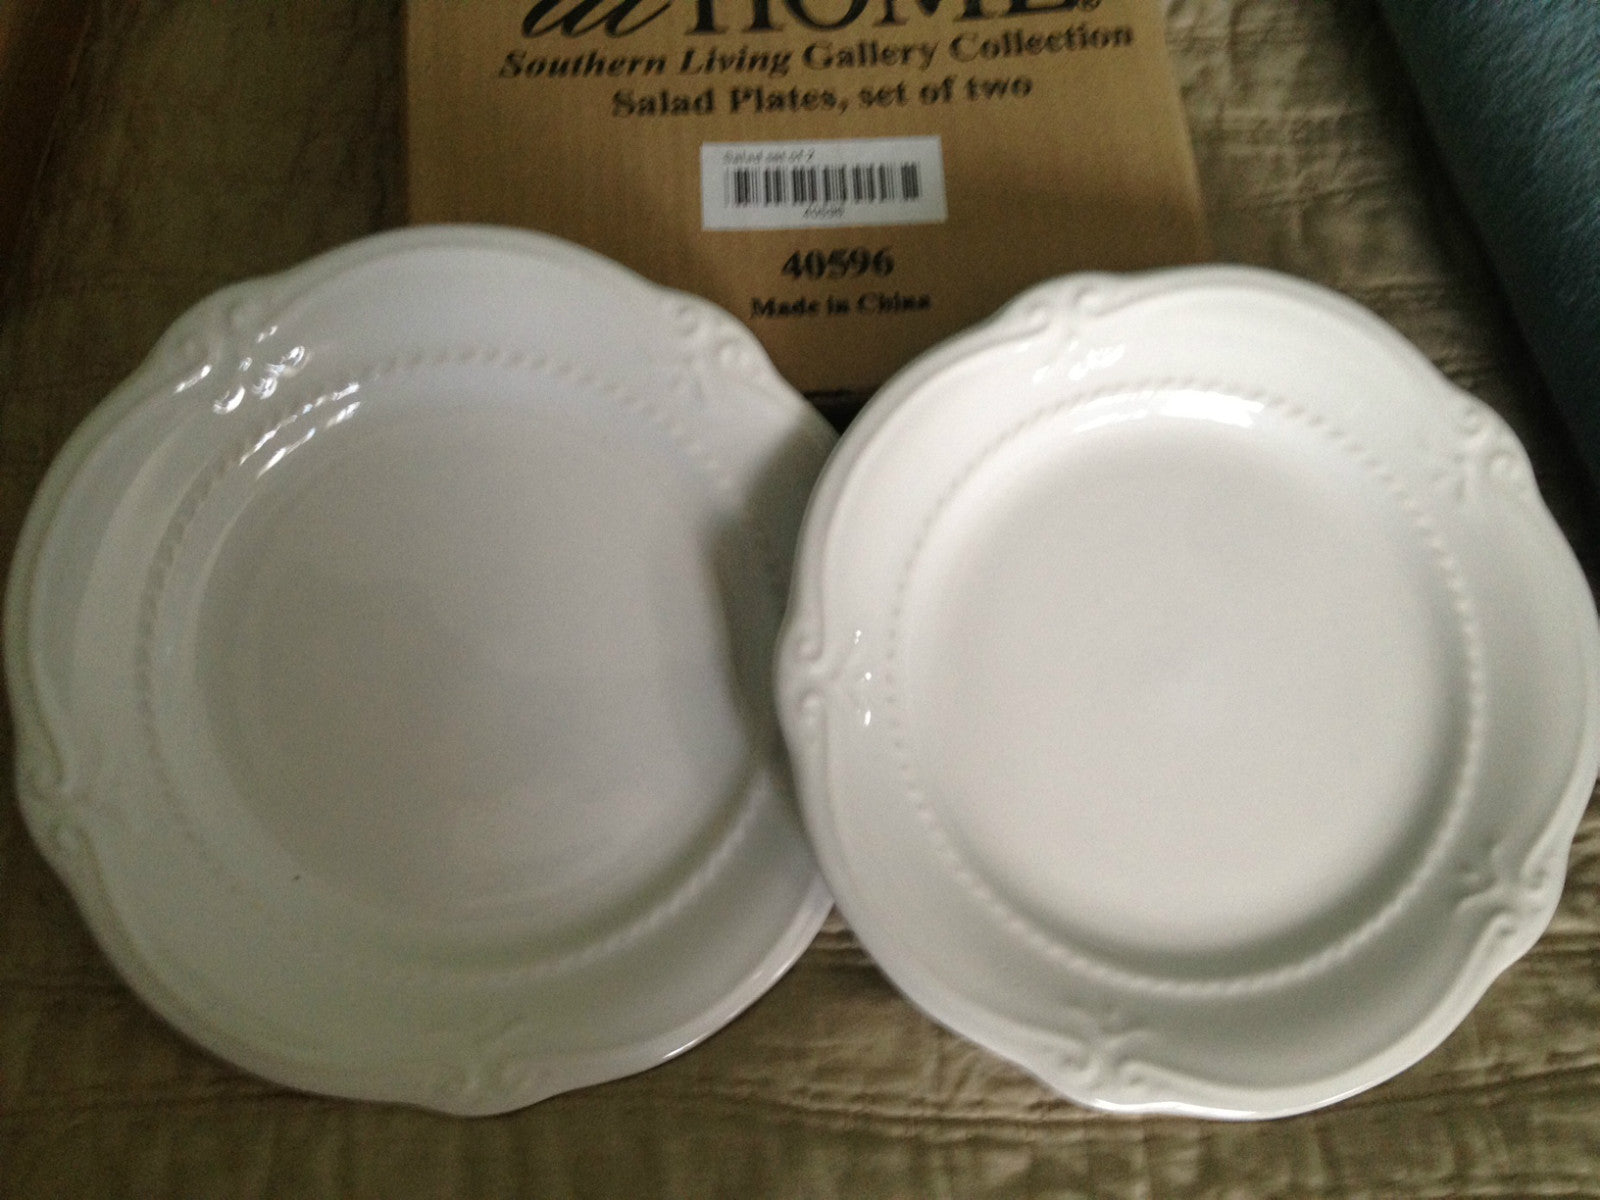 Southern Living at HOME GALLERY WHITE WARE CERAMIC POTTERY 2 SALAD DESSERT PLATES - Plastic Glass and Wax ~ PGW